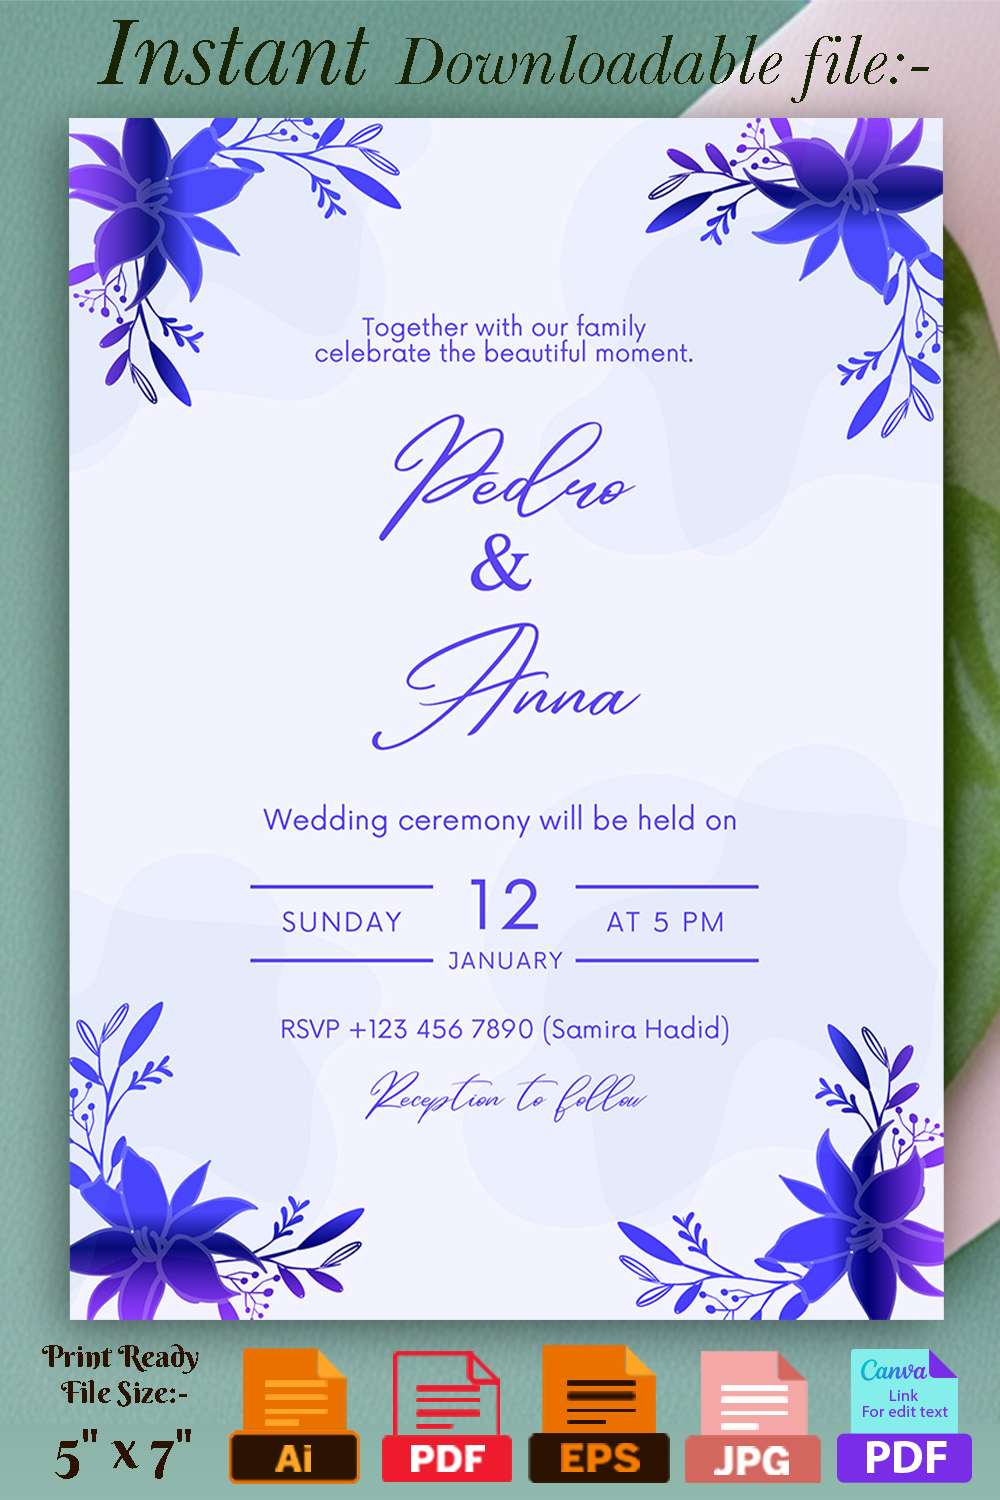 Image with unique wedding invitation card with flowers in blue.